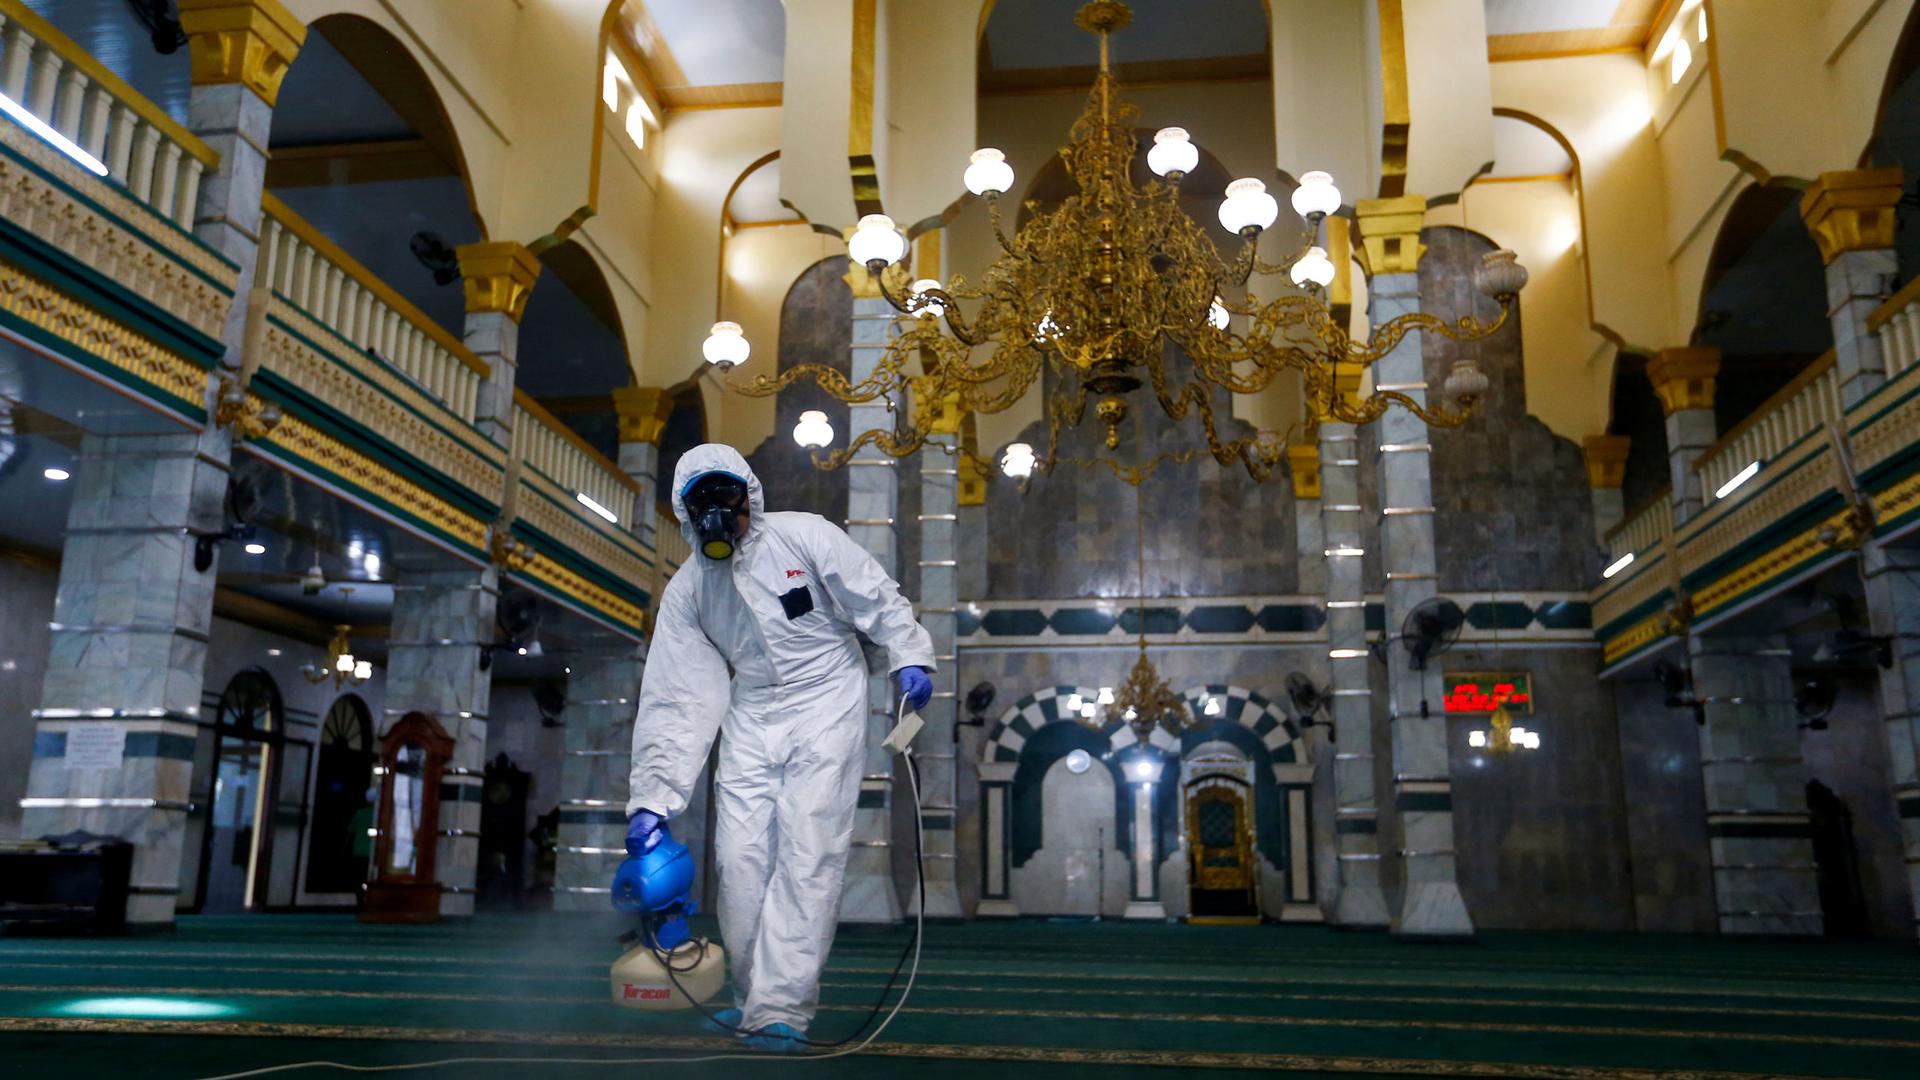 A medical officer wearing a white protective suit and a full face mask is shown spraying a carpet of a open area.